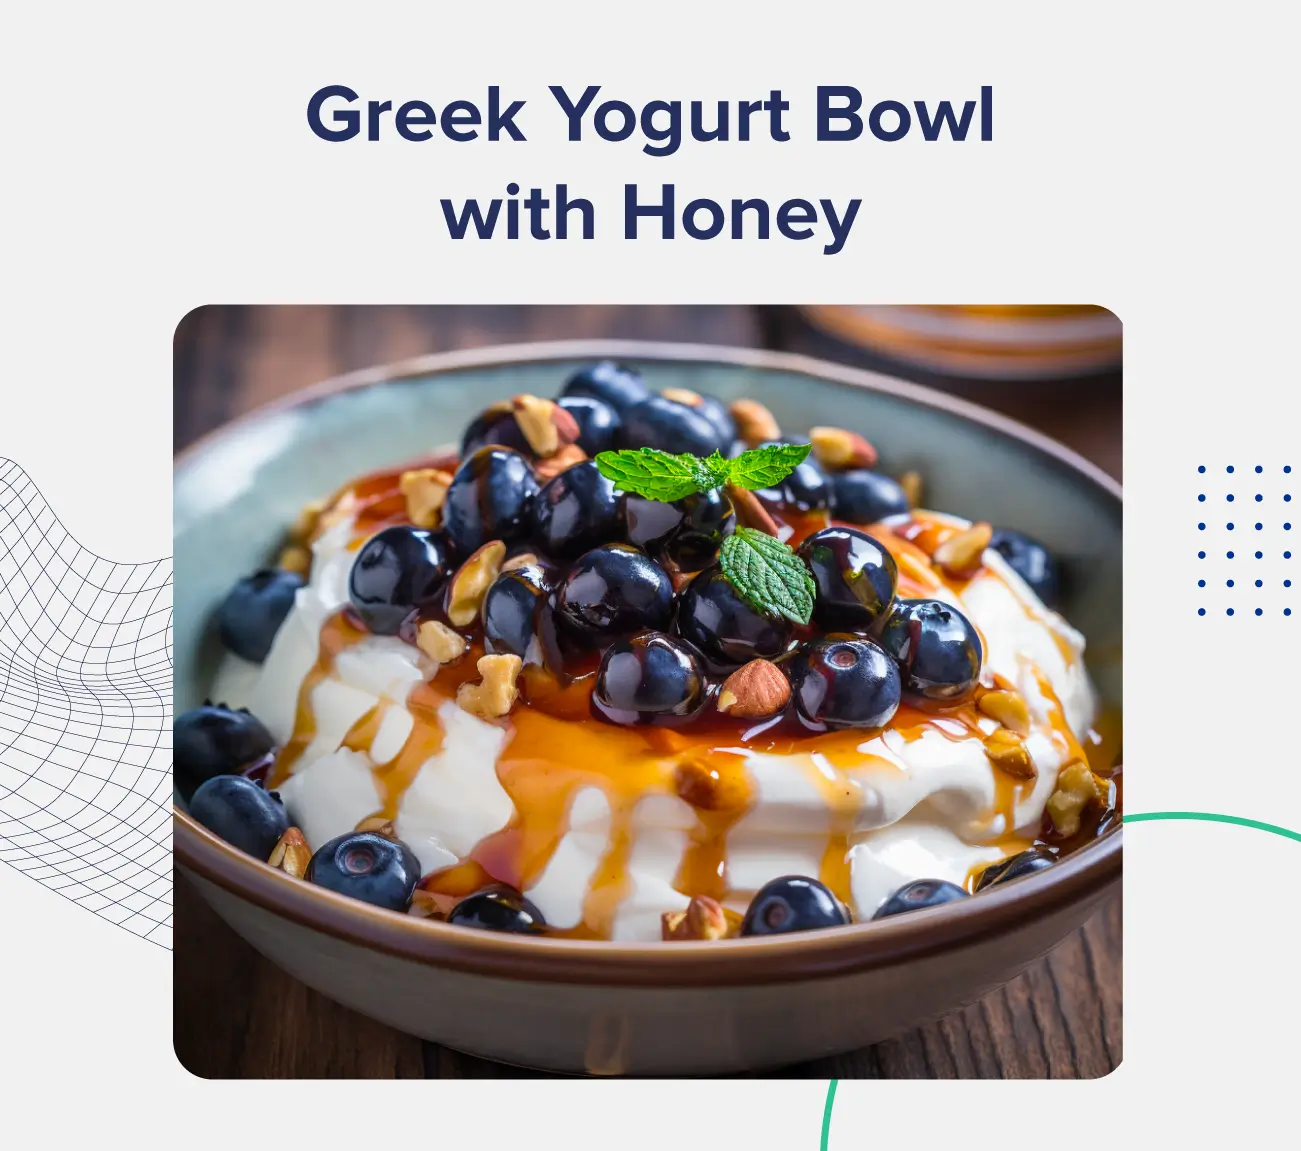 A graphic entitled "Greek Yogurt Bowl with Honey" depicting a bowl of yogurt covered in blueberries and honey.